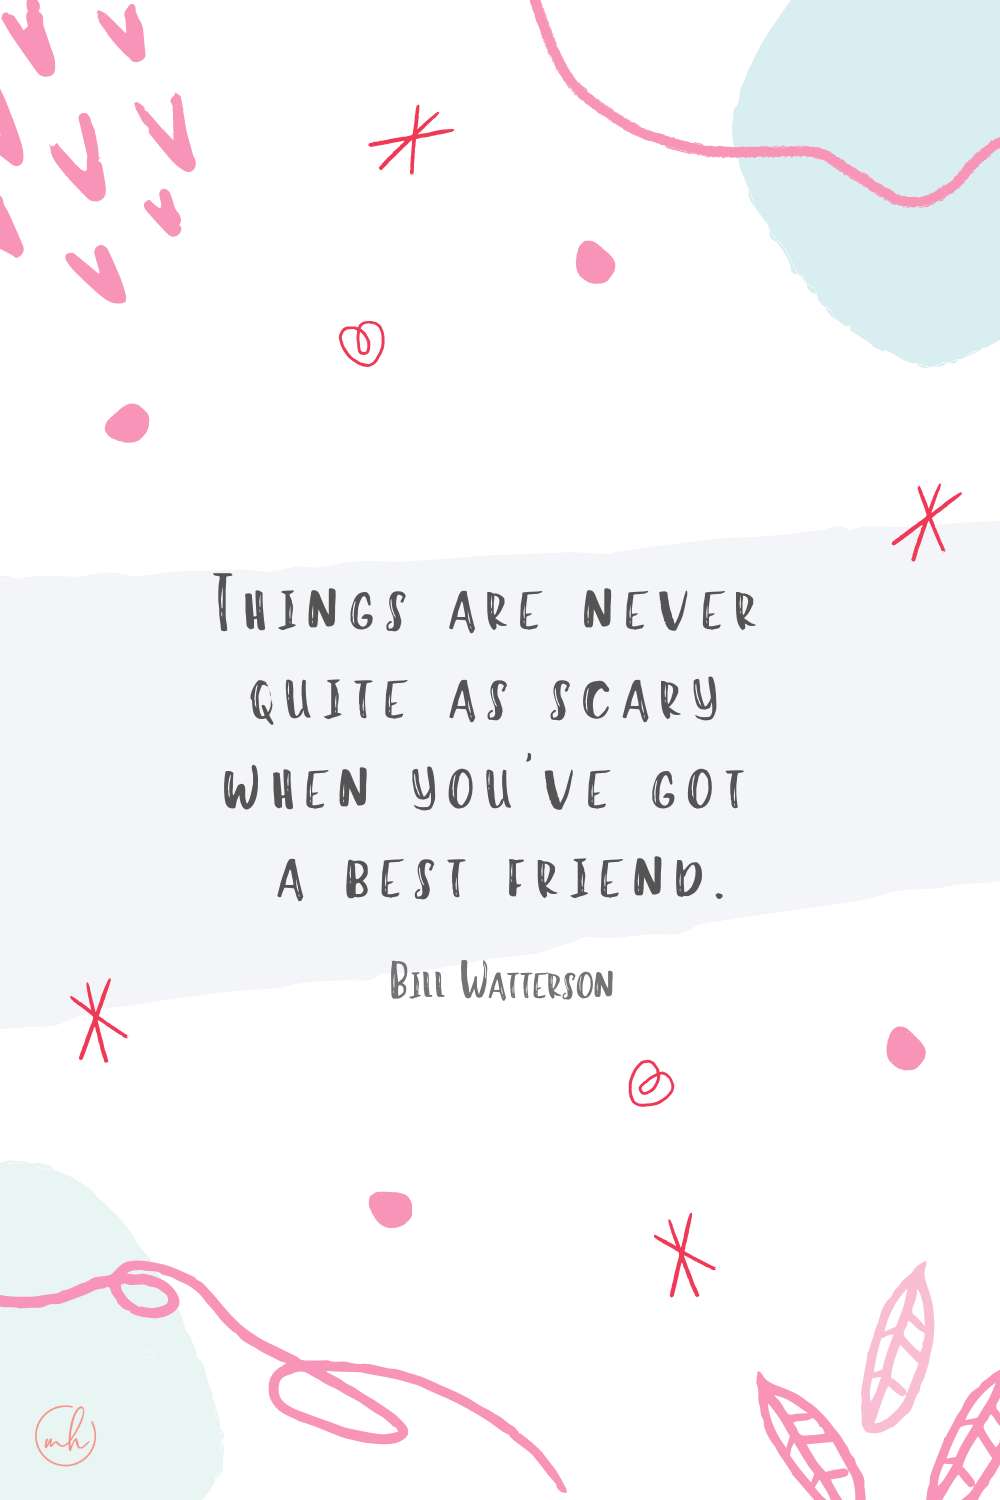 “Things are never quite as scary when you’ve got a best friend.” - Bill Watterson